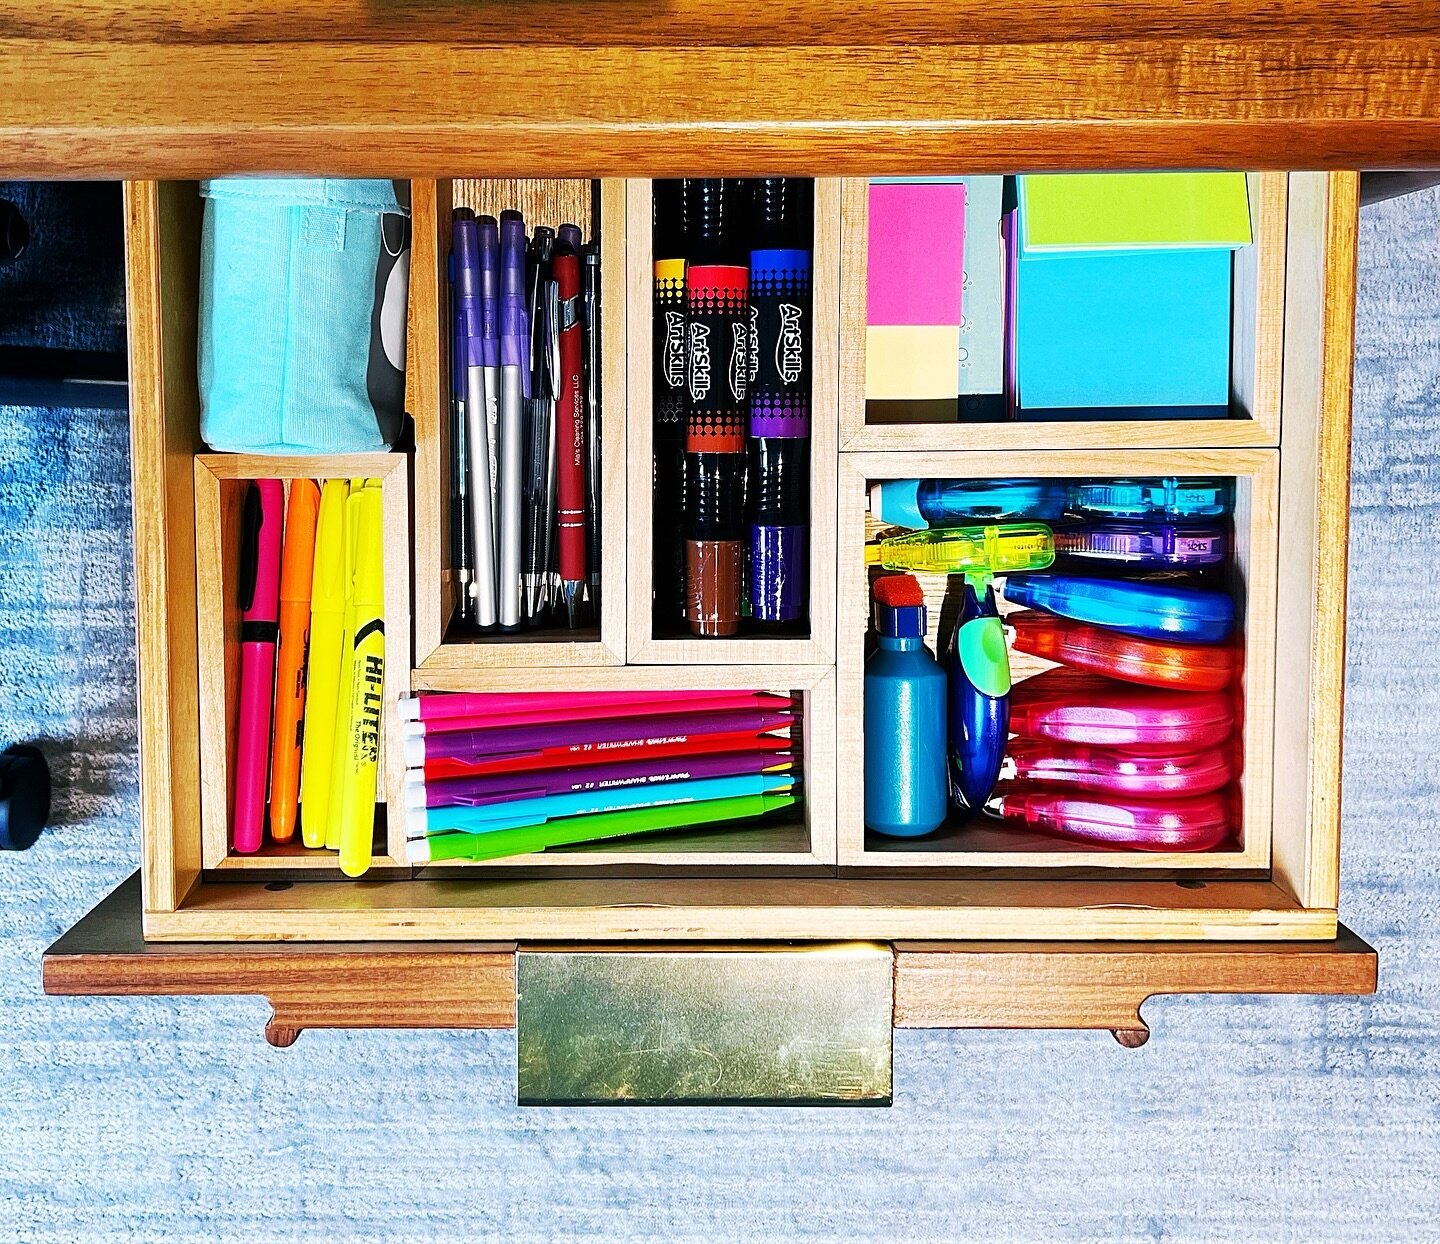 PERFECT MATCH⁣
⁣
When the drawer inserts look like they were made custom for the desk 🤌🏼 ⁣
⁣
#organizedsimplicity #home #organization #professionalorganizers #atlanta #organizedhome #atlantaorganizers #homeorganization #organizing